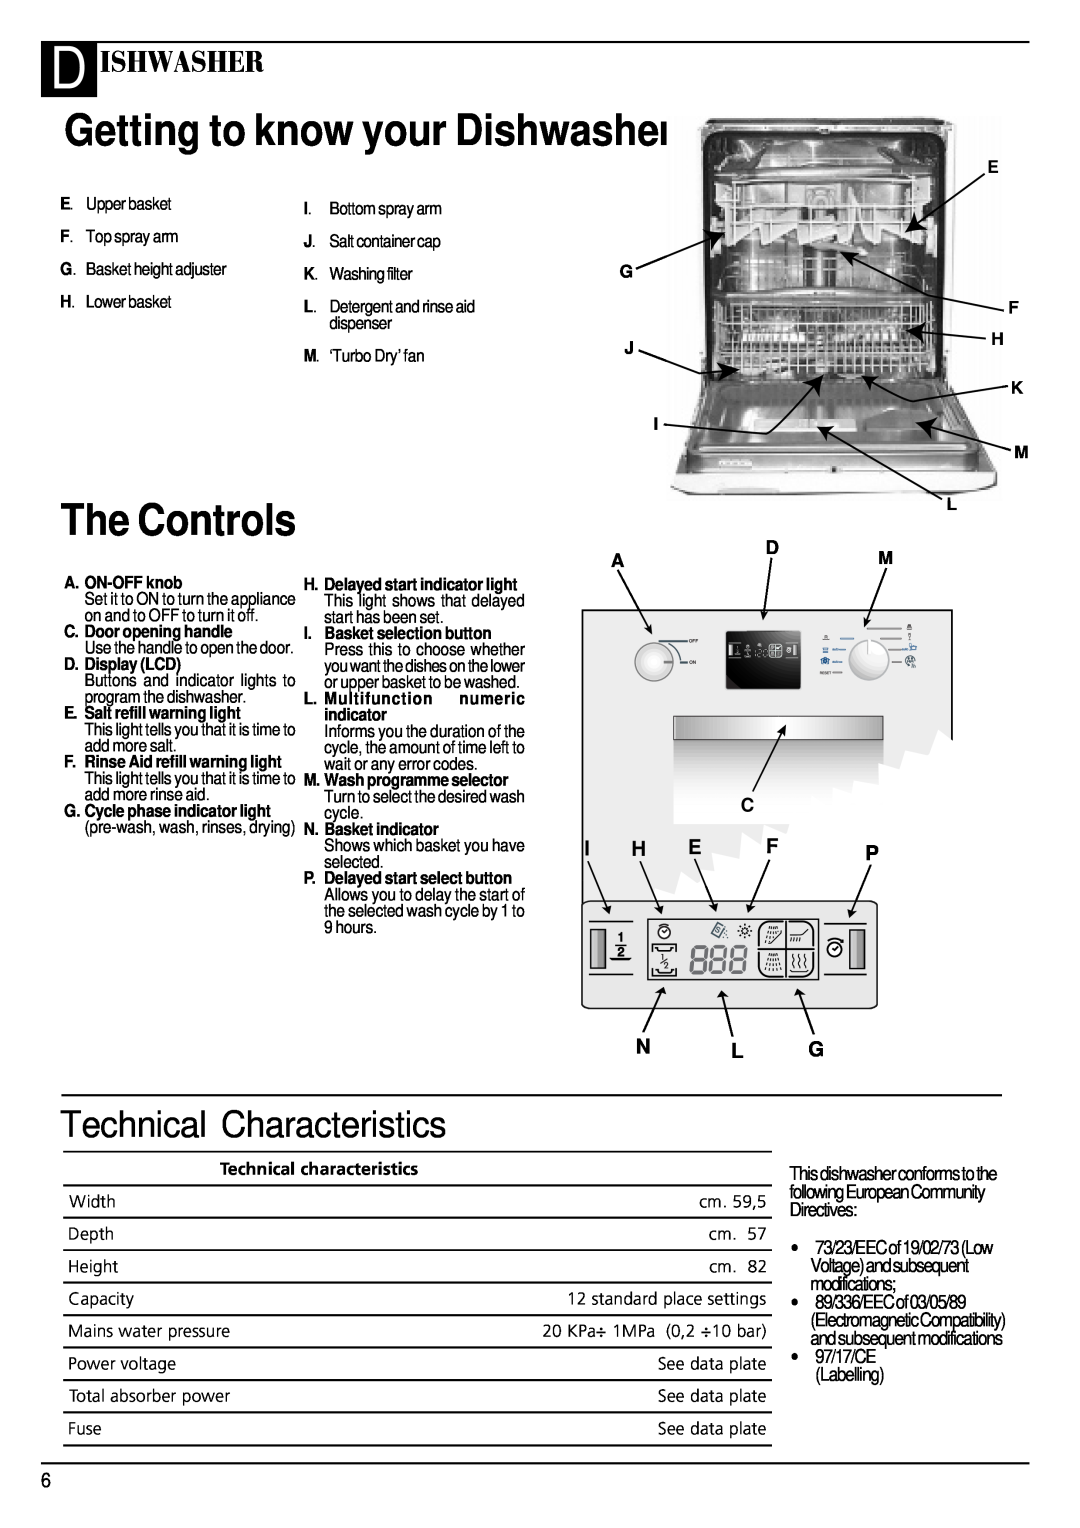 Hotpoint BFT68 manual Getting to know your Dishwasher, The Controls, Technical Characteristics, D Ishwasher, H E F, N L G 